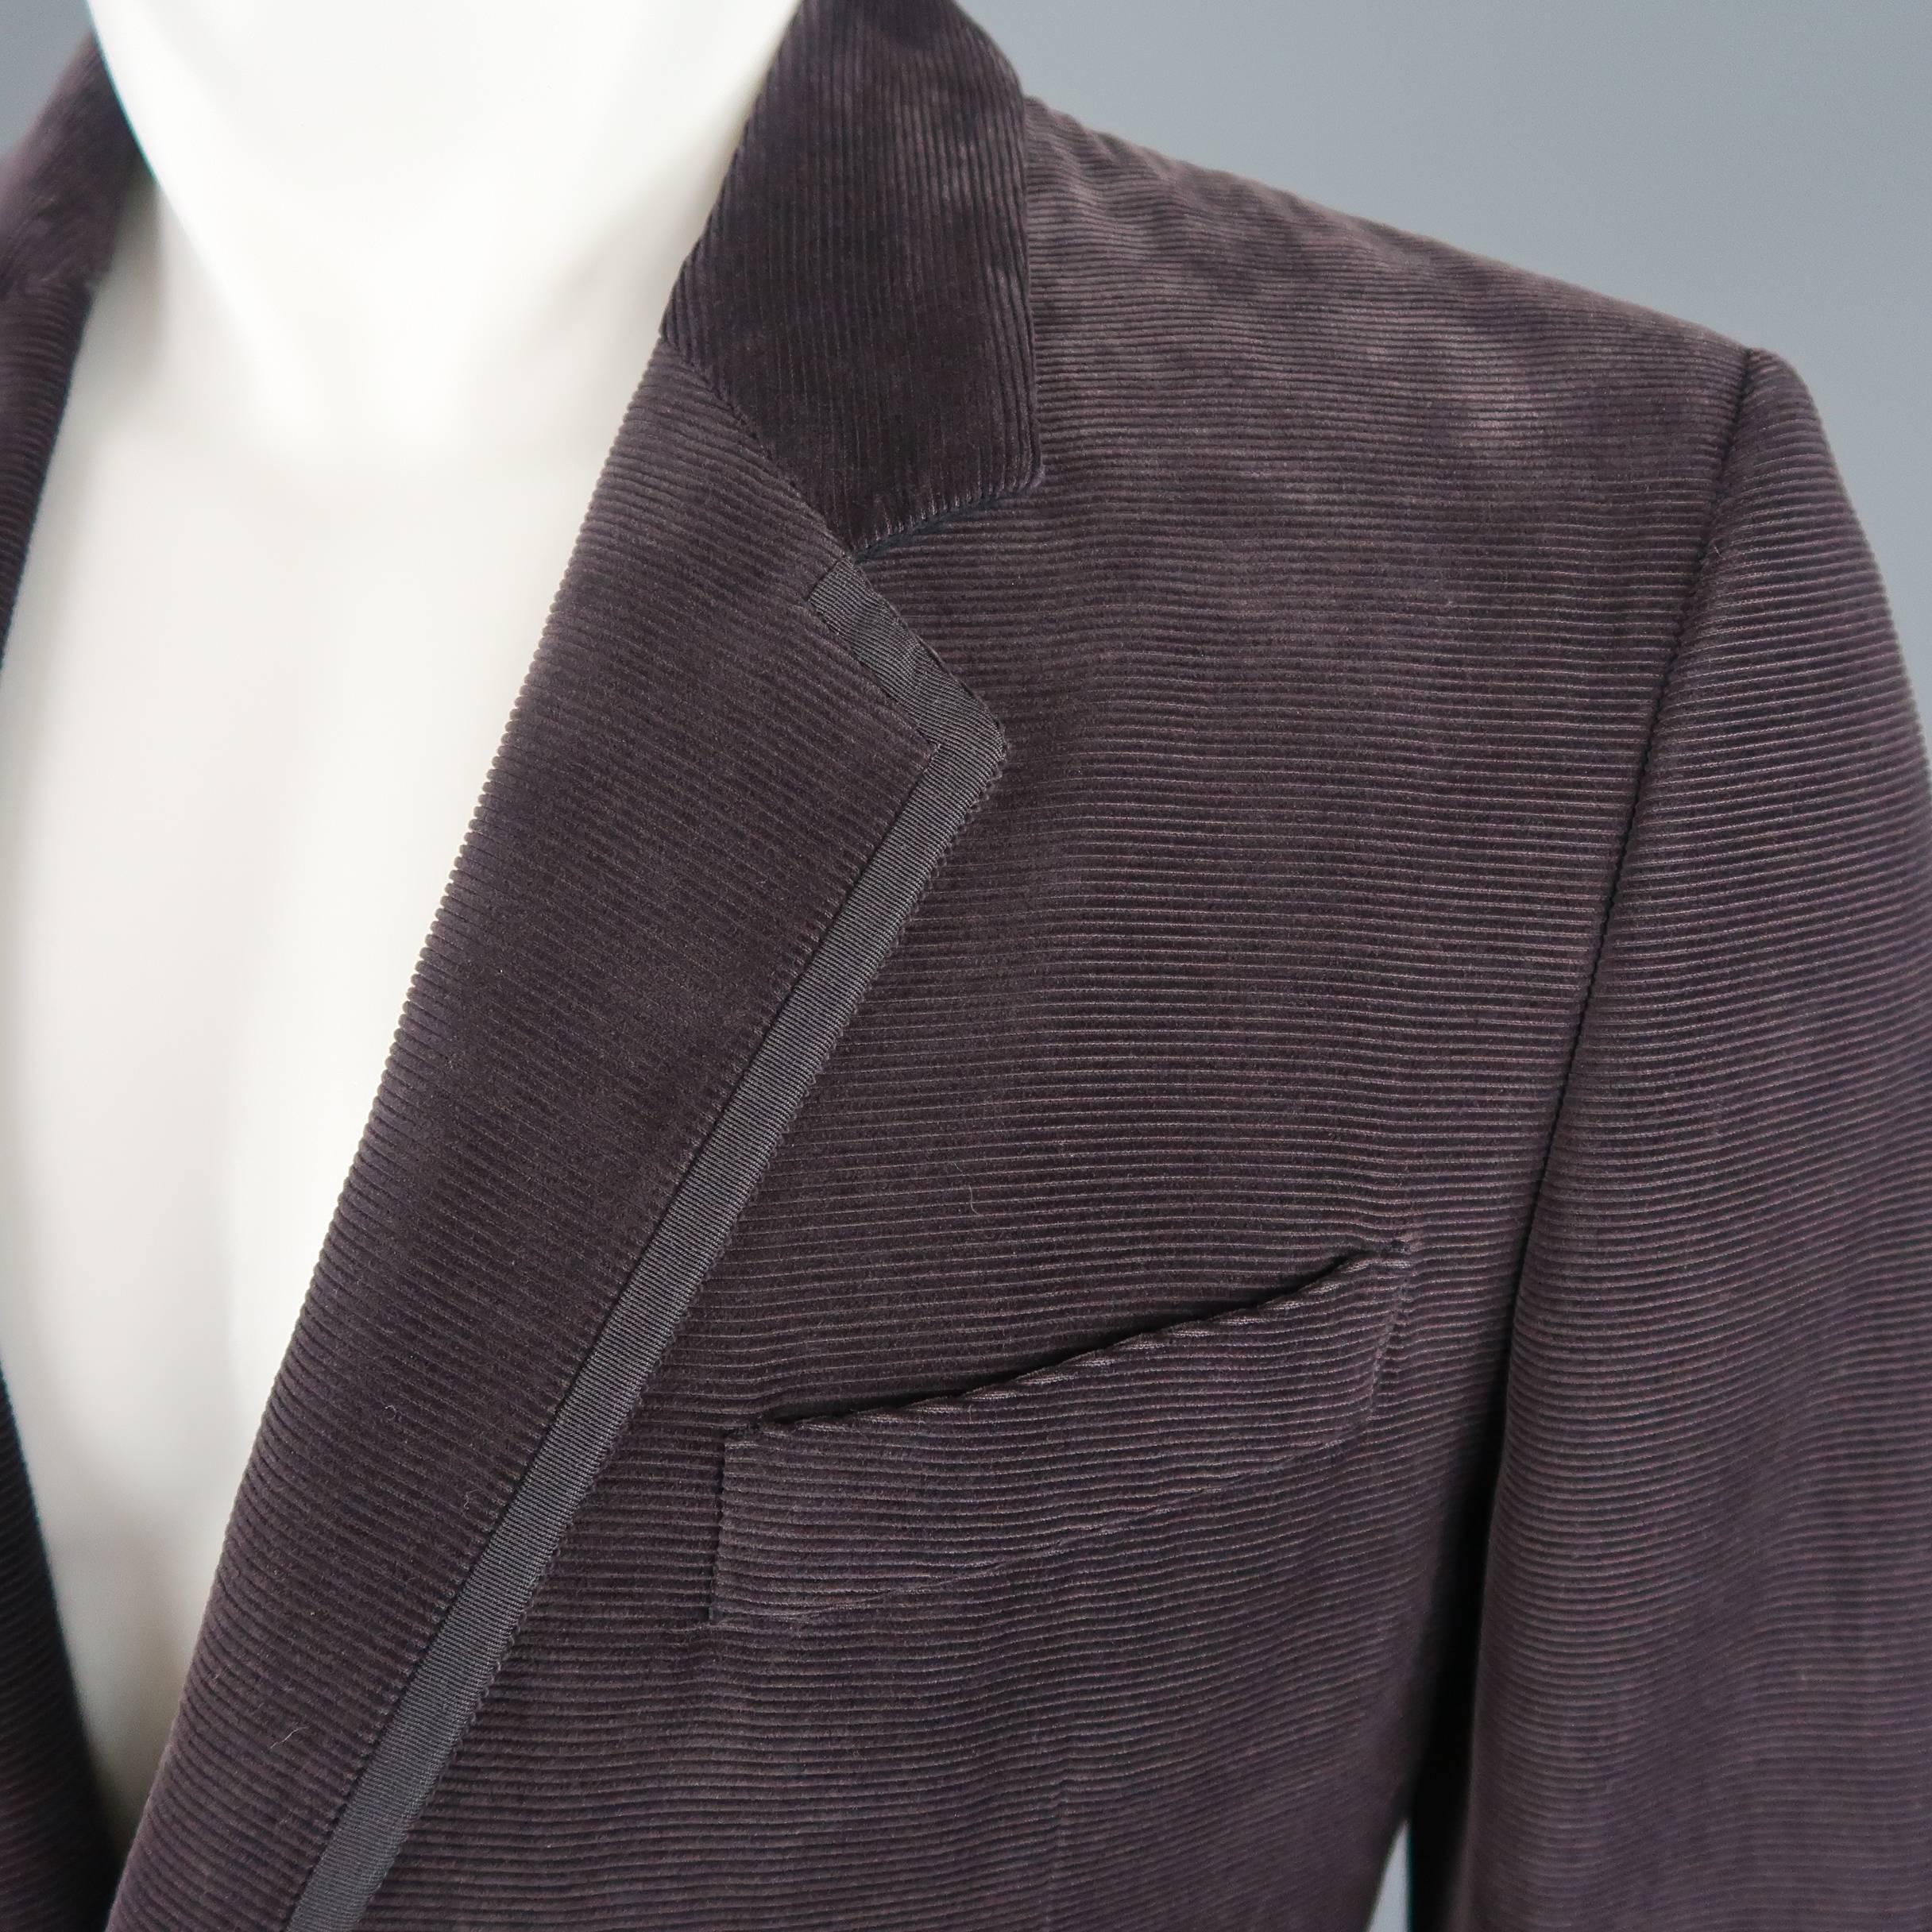 Single breasted SALVATORE FERRAGAMO sport coat comes in muted eggplant purple corduroy with a notch lapel, two button front, and grosgrain piping. Wear throughout. Made in Italy.
 
Fair Pre-Owned Condition.
Marked: IT 52
 
Measurements:
 
Shoulder: